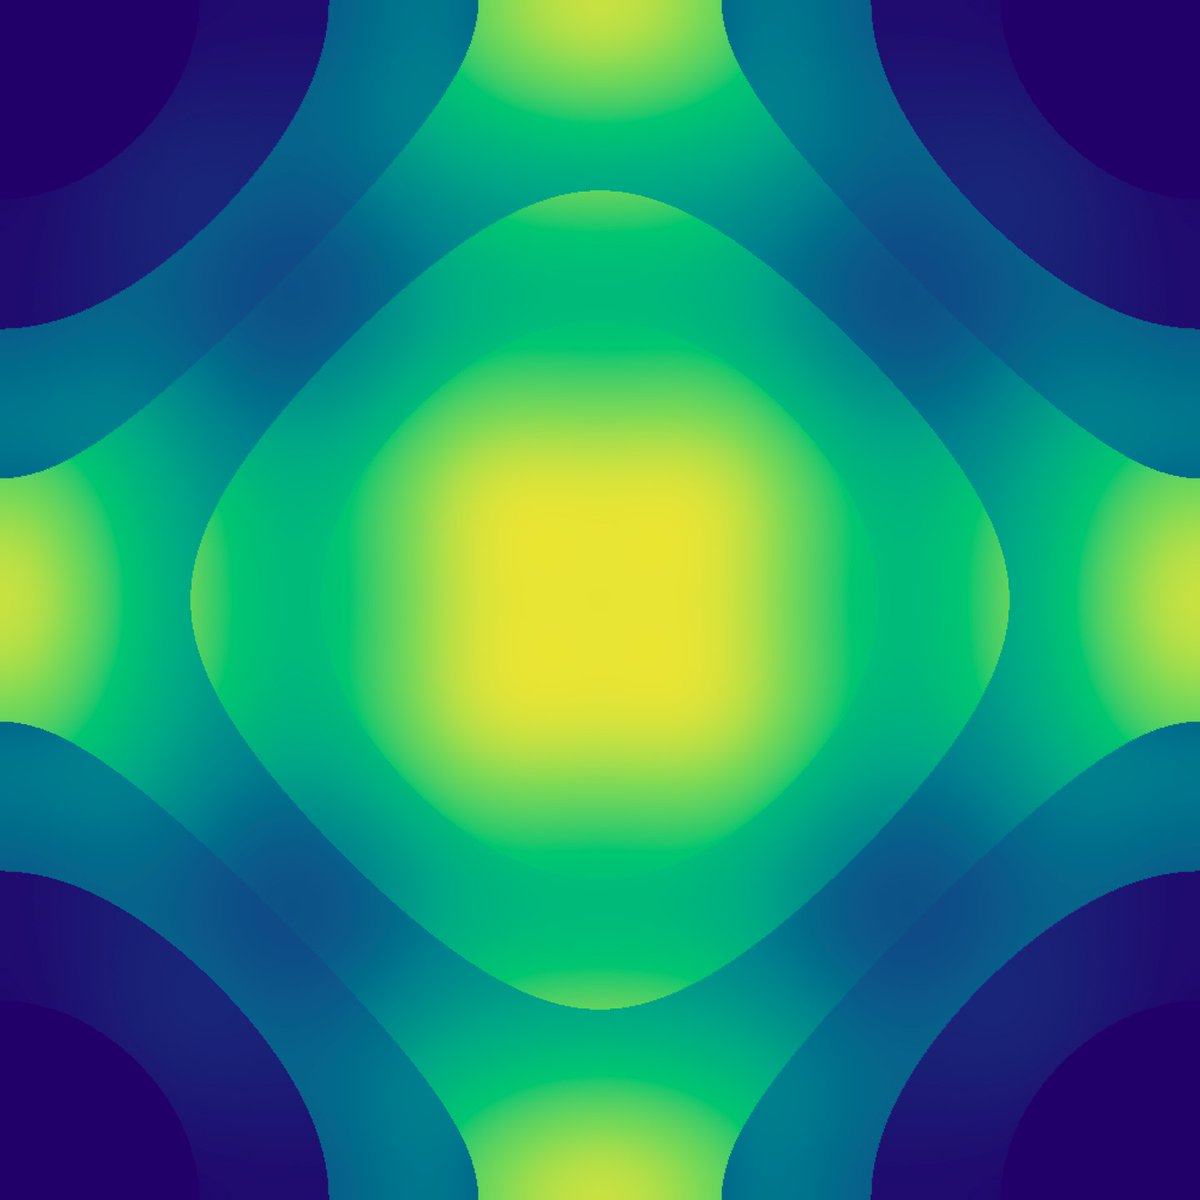 Some materials are transparent to light of a certain frequency. When such light is shone on them, electrical currents can still be generated, contrary to previous assumptions. Proven by scientists from #UniLeipzig and @NTUsg, published in @PhysRevLett. uni-leipzig.de/en/newsdetail/…